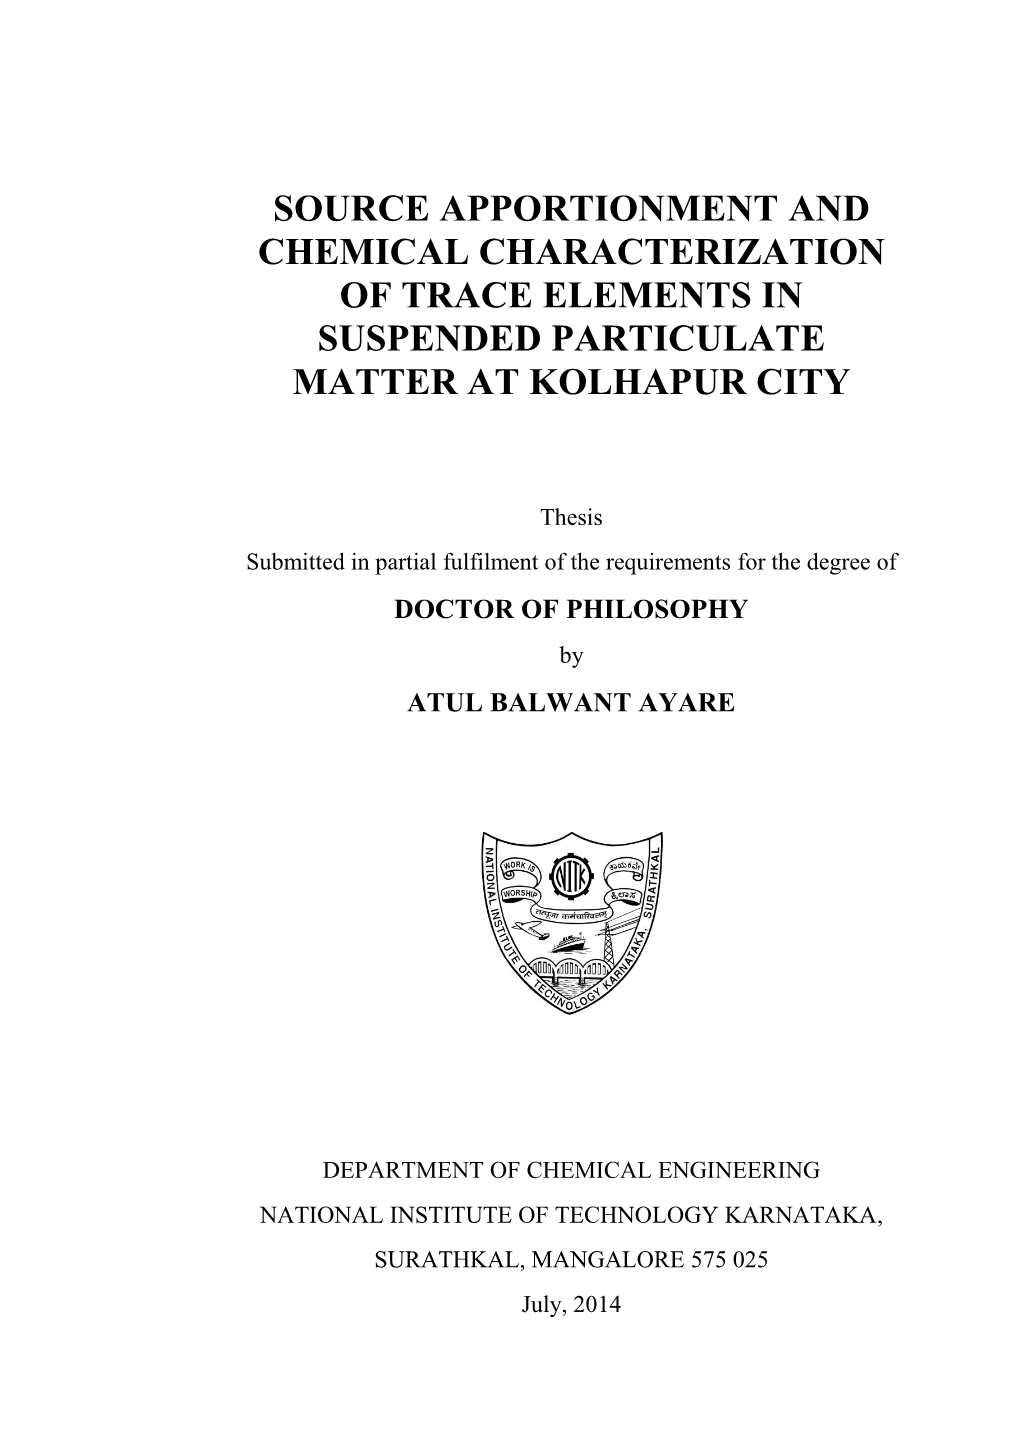 Source Apportionment and Chemical Characterization of Trace Elements in Suspended Particulate Matter at Kolhapur City